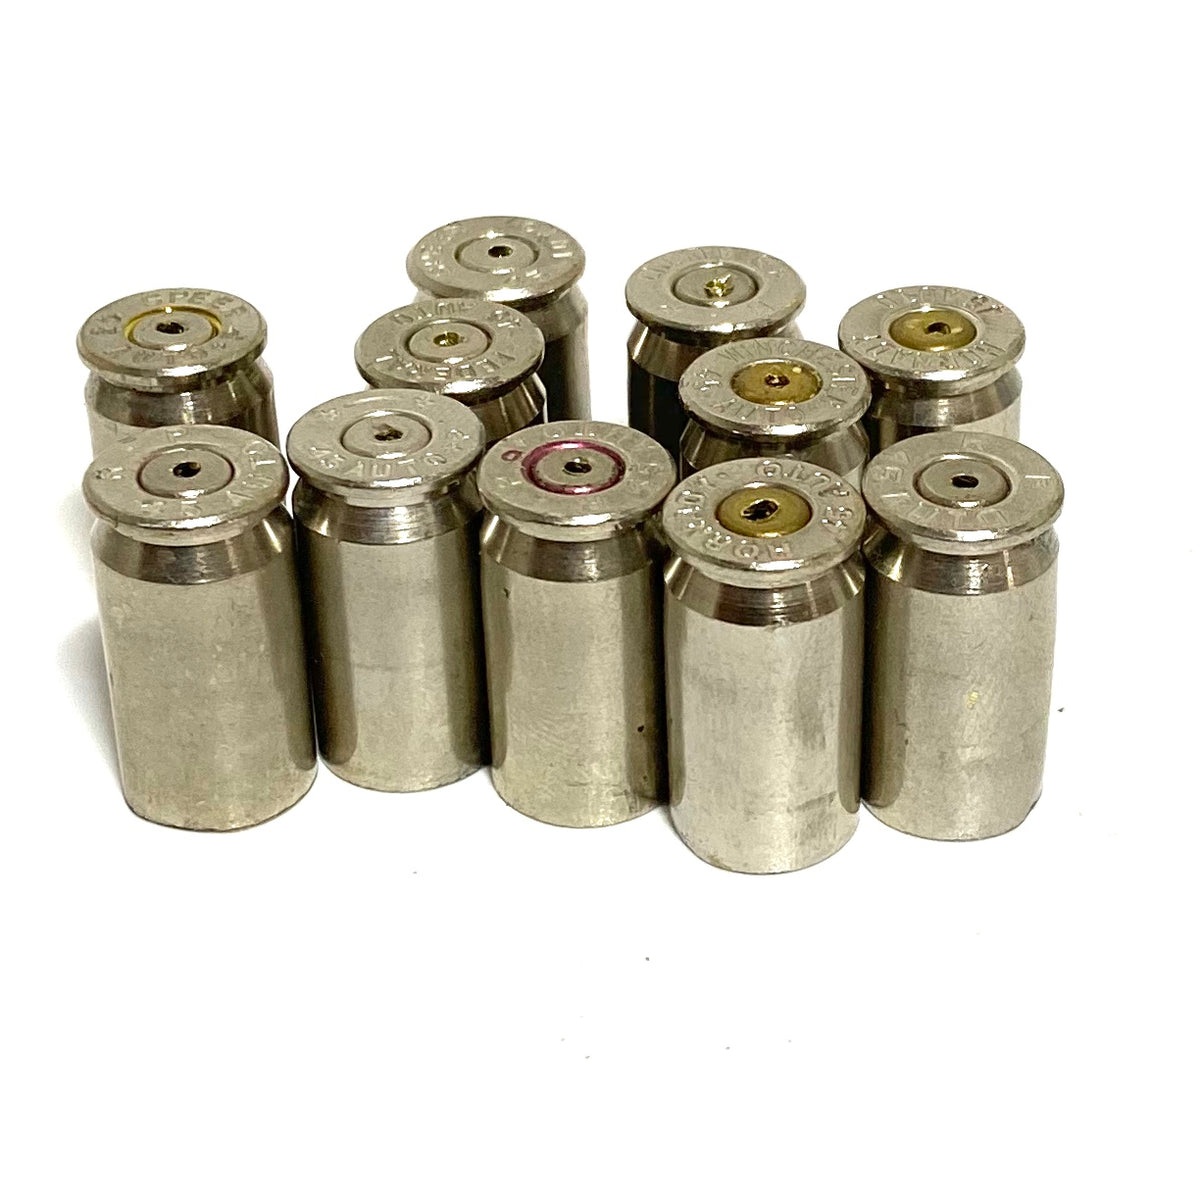 45 ACP Drilled Nickel Empty Brass Shells Used Spent Bullet Casings